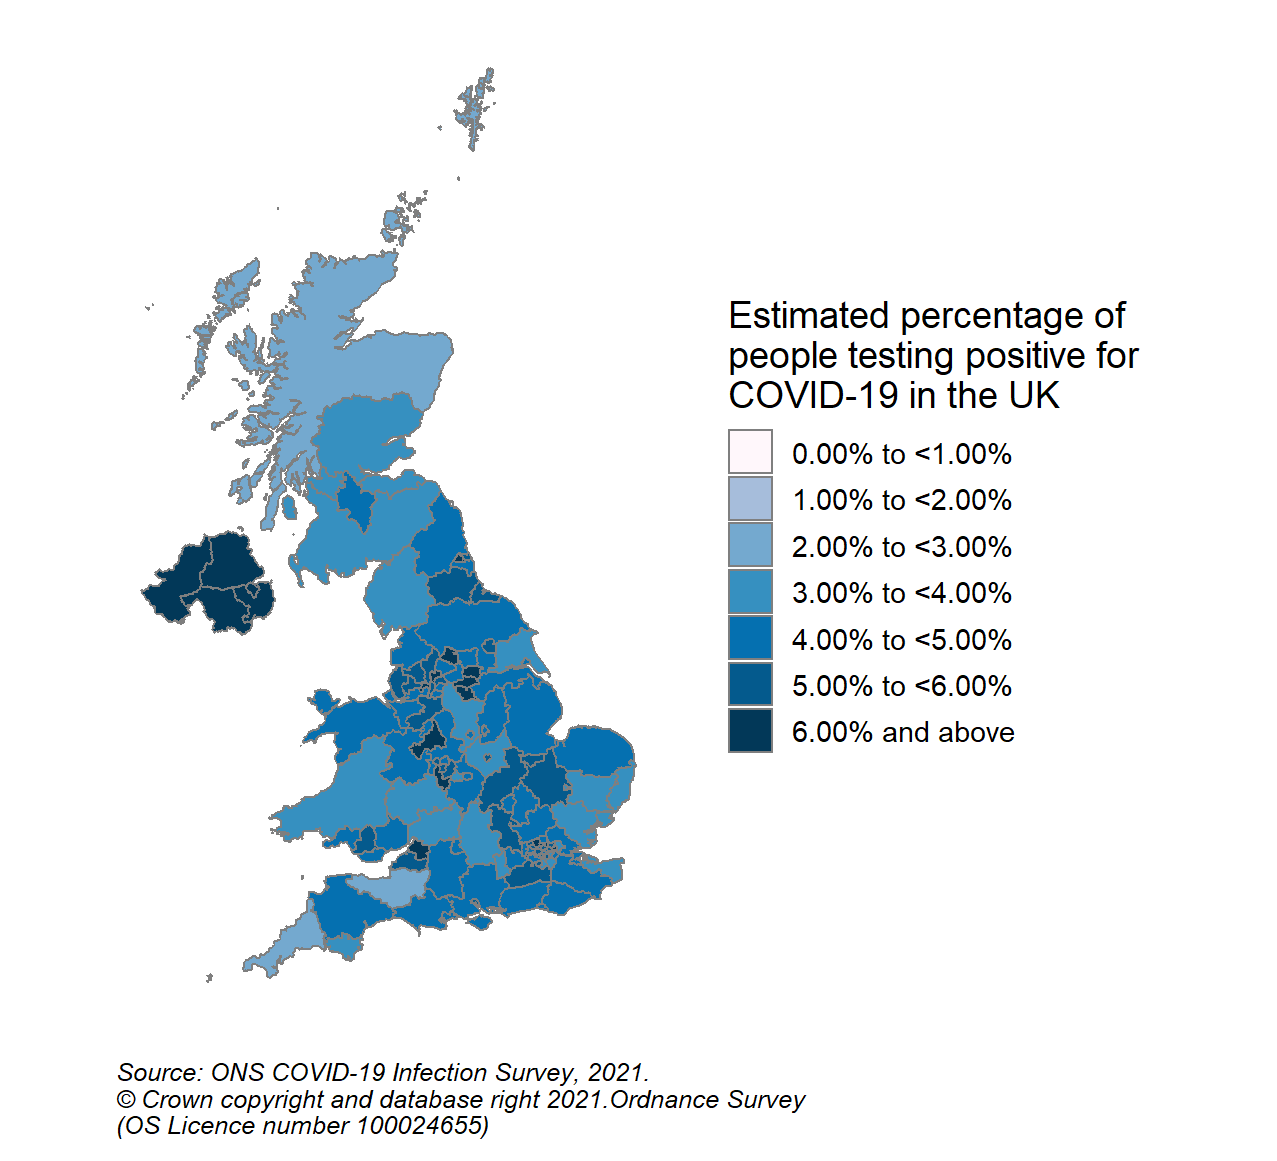 This colour coded map of the UK shows the modelled estimates of the percentage of the private residential population testing positive for COVID-19, by COVID-19 Infection Survey sub-regions. In Scotland, these sub-regions are comprised of Health Boards. The regions are: 123 - NHS Grampian, NHS Highland, NHS Orkney, NHS Shetland and NHS Western Isles, 124 - NHS Fife, NHS Forth Valley and NHS Tayside, 125 - NHS Greater Glasgow & Clyde, 126 - NHS Lothian, 127 - NHS Lanarkshire, 128 - NHS Ayrshire & Arran, NHS Borders and NHS Dumfries & Galloway.  The sub-region with the highest modelled estimate for the percentage of people testing positive was CIS Region 127 (NHS Lanarkshire) at 4.76% (95% credible interval: 3.91% to 5.81%).  The sub-region with the lowest modelled estimate was Region 123 (NHS Grampian, NHS Highland, NHS Orkney, NHS Shetland and NHS Western Isles), at 2.74% (95% credible interval: 2.24% to 3.38%).